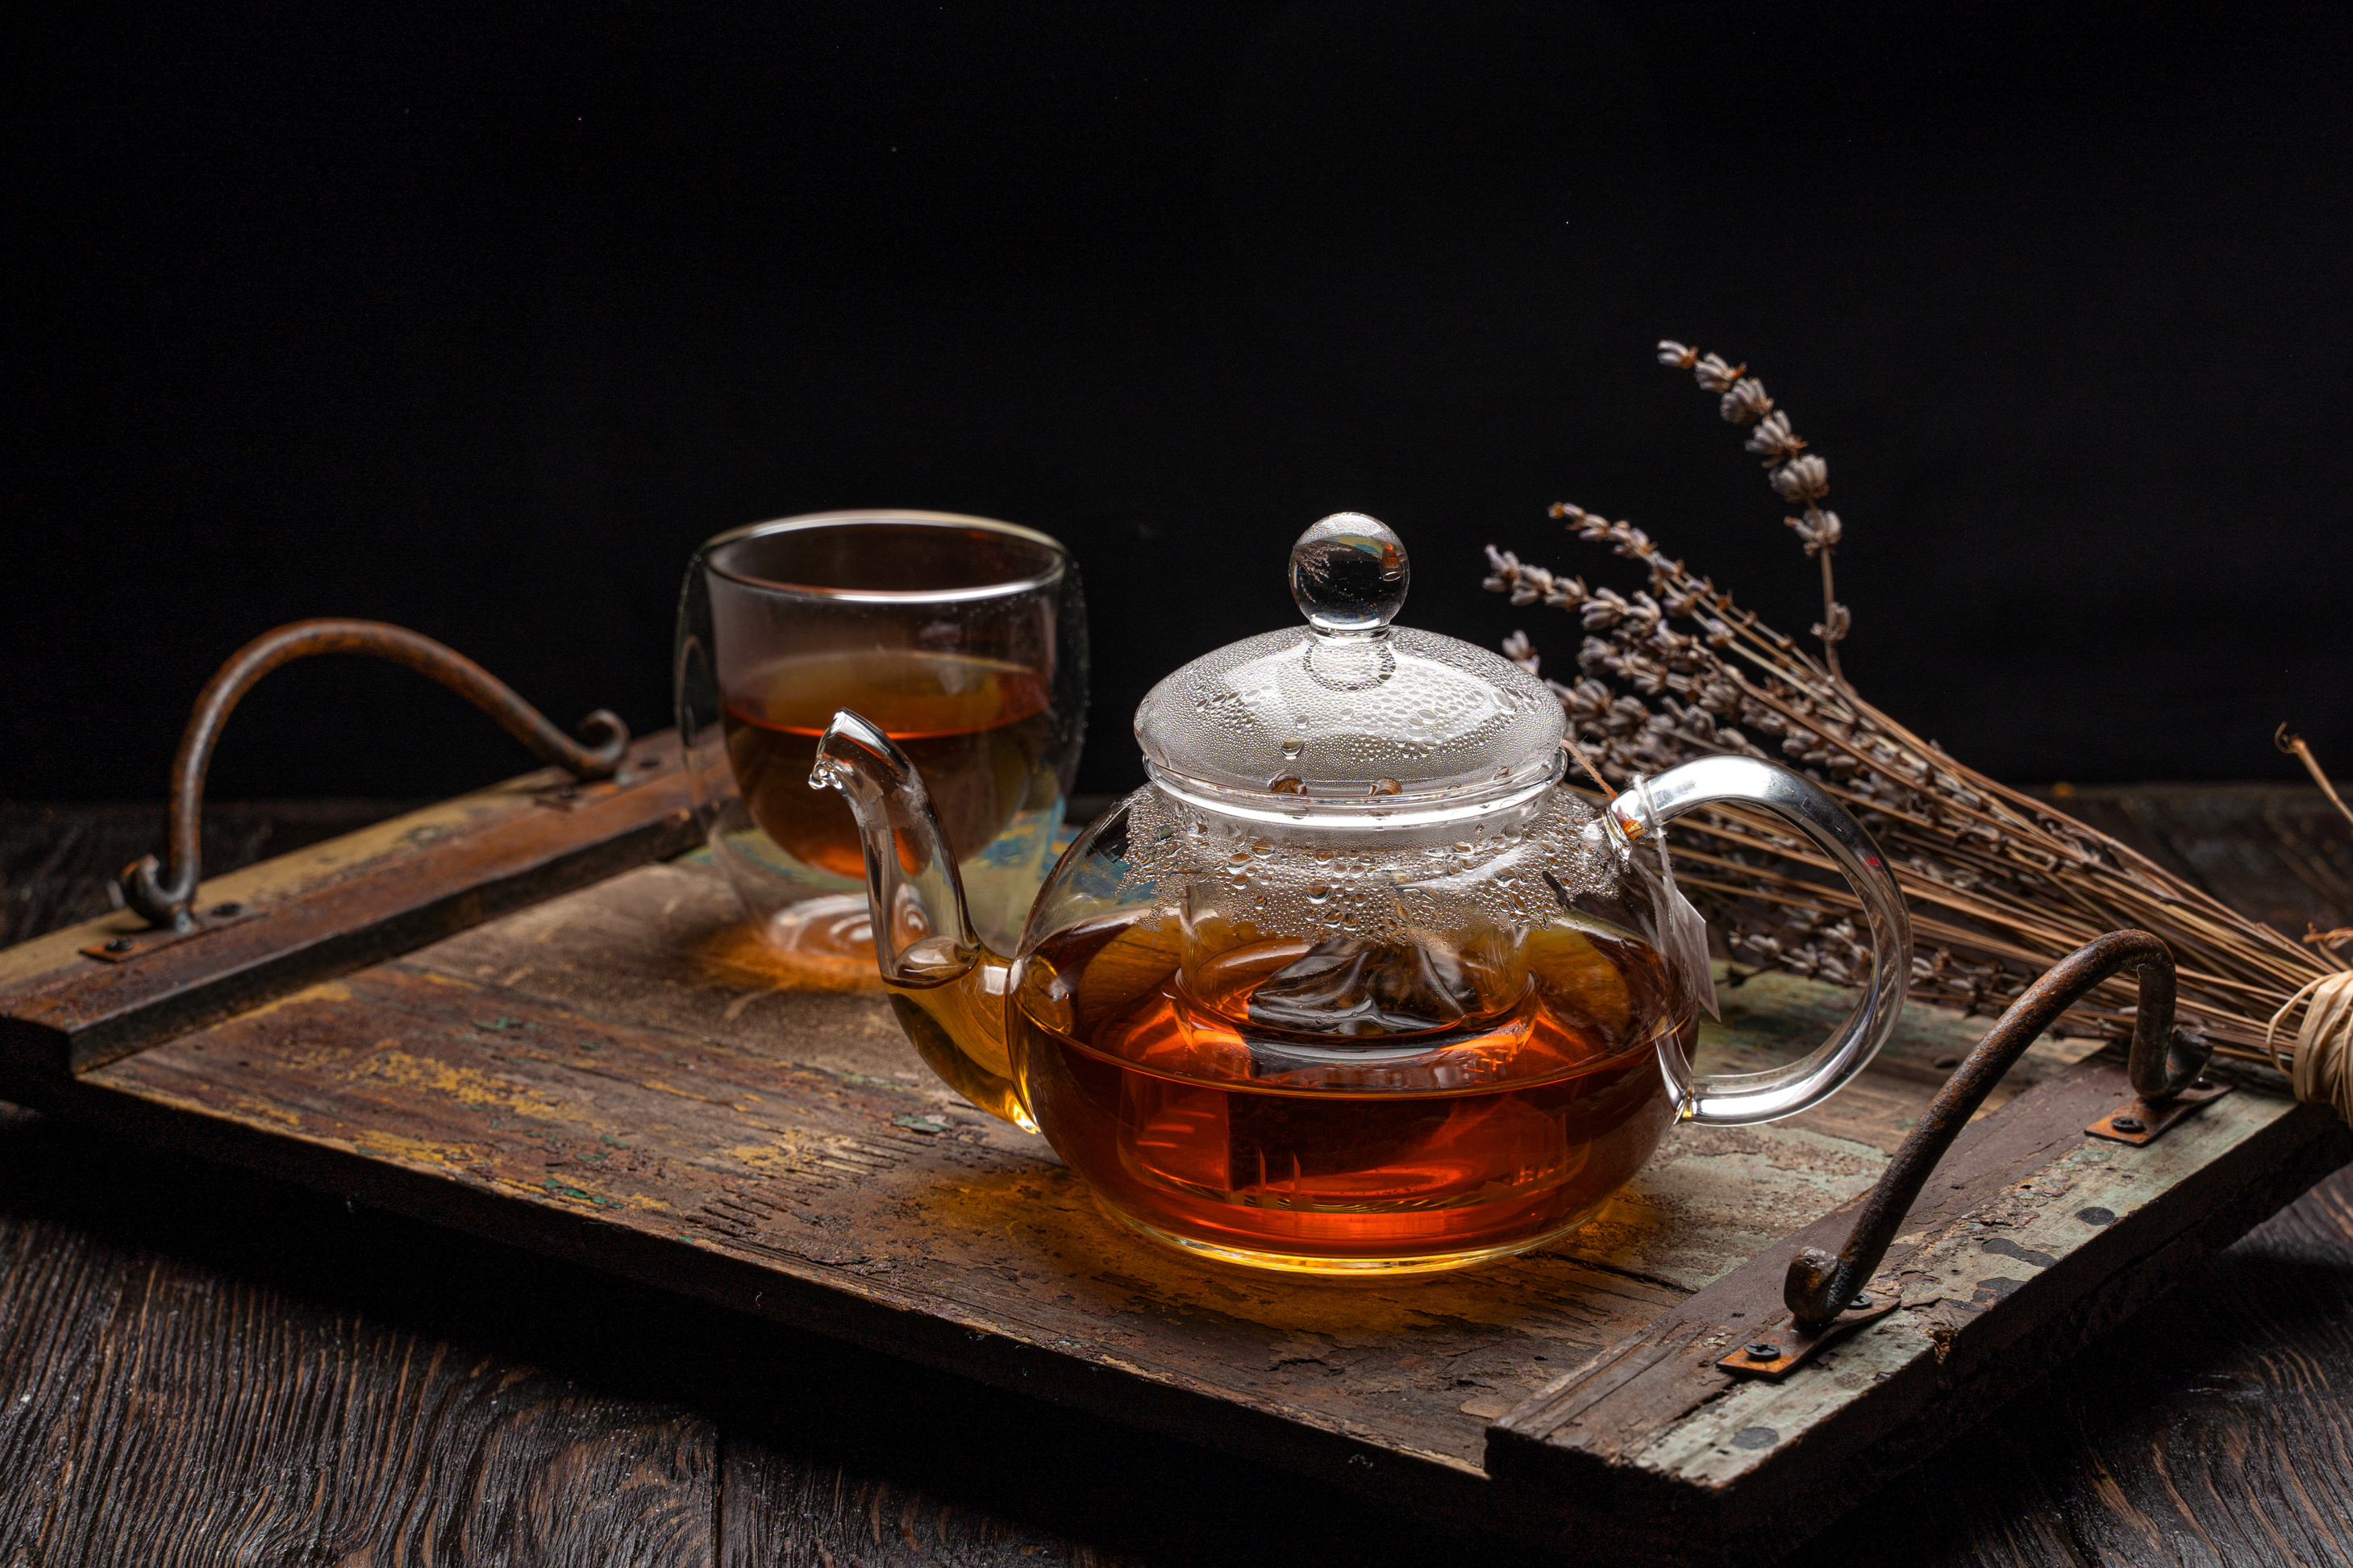 Teapot on a Wooden Tray